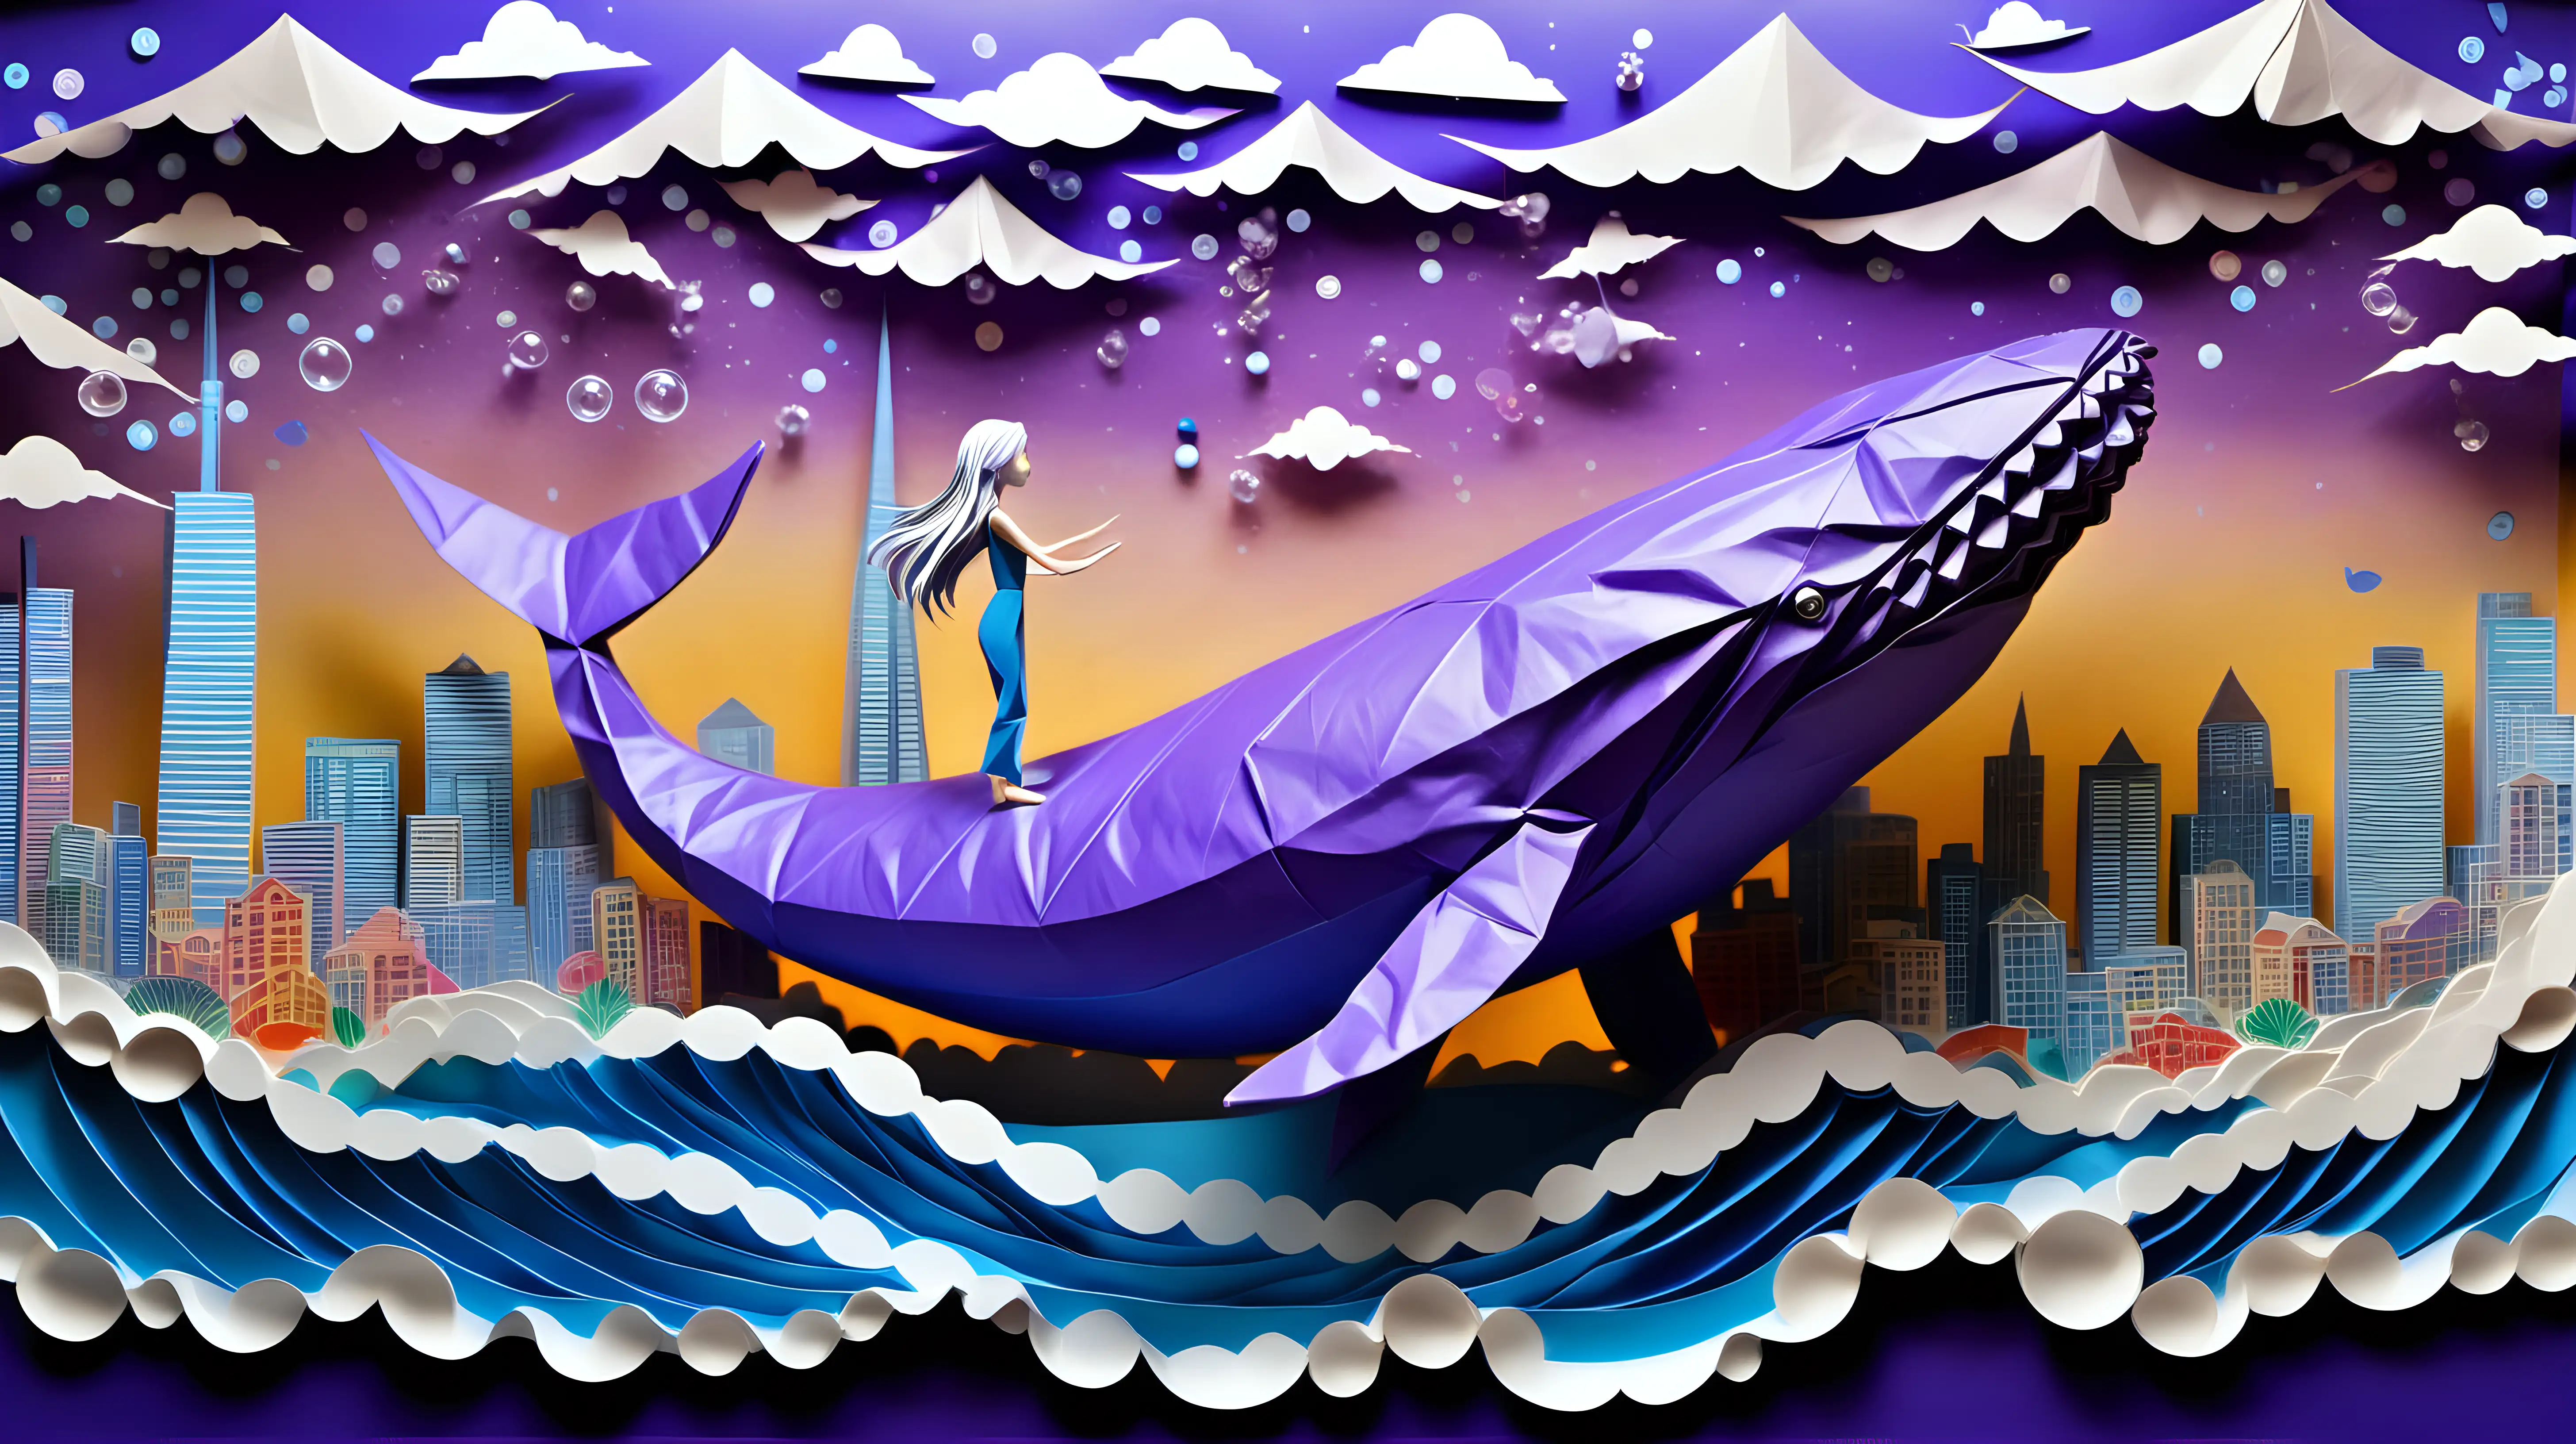 Enchanting Ghibli Inspired Art SilverHaired Girl and Purple Whale in Tokyo Skyline